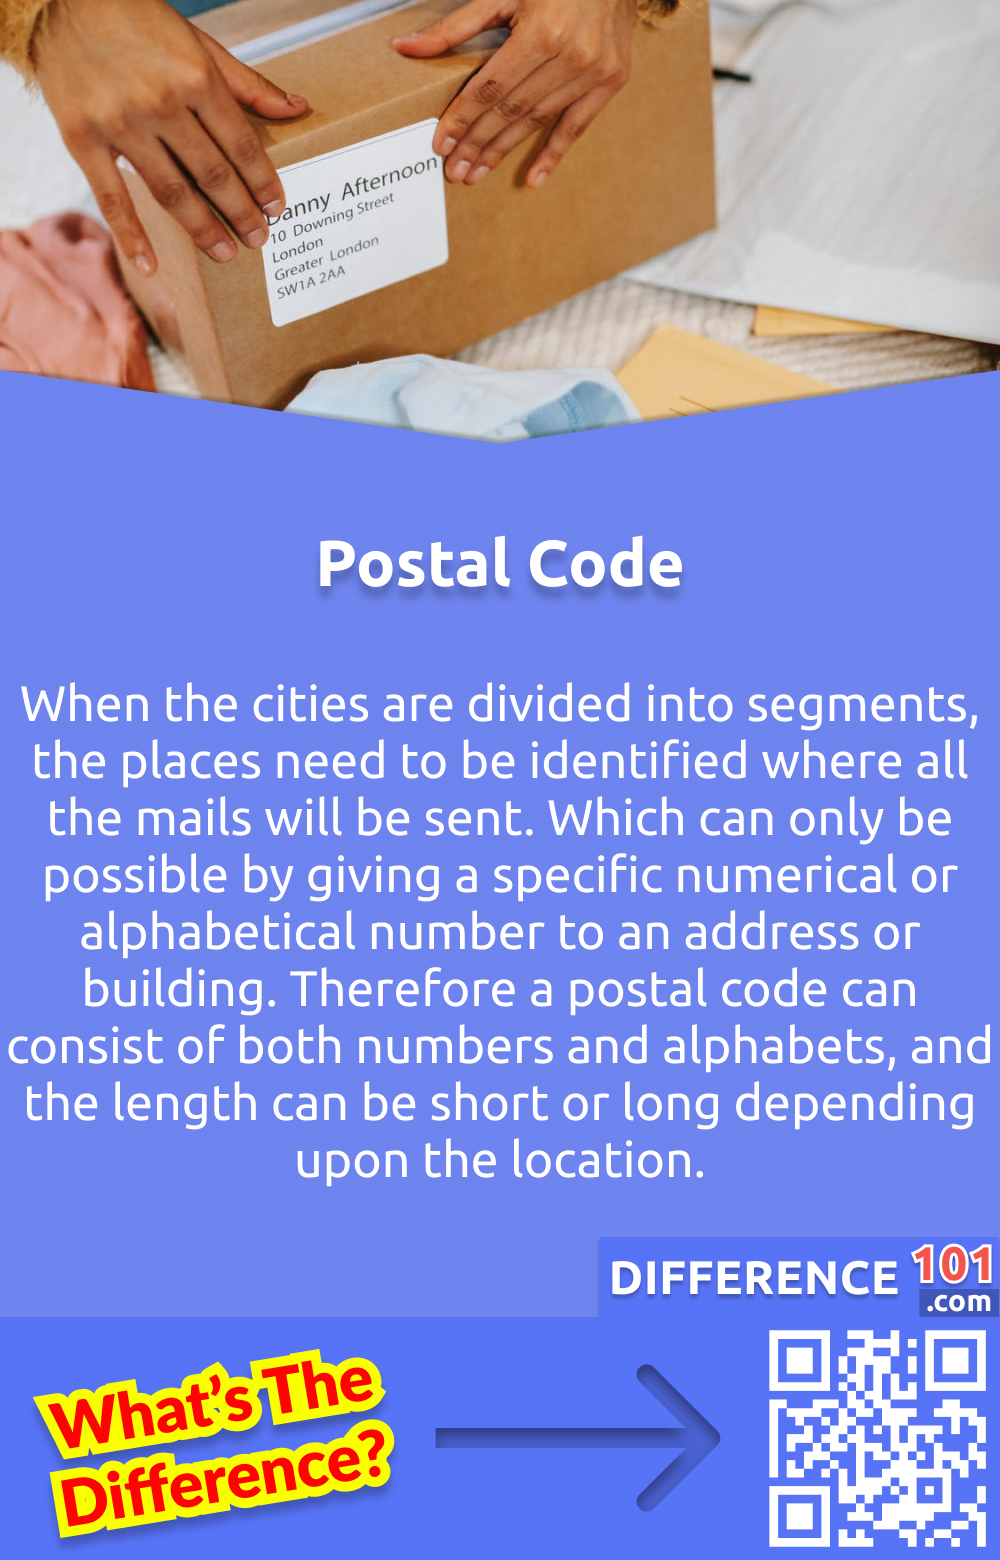 What is a Postal Code? When the cities are divided into segments, the places need to be identified where all the mails will be sent. Which can only be possible by giving a specific numerical or alphabetical number to an address or building. Therefore a postal code can consist of both numbers and alphabets, and the length can be short or long depending upon the location.